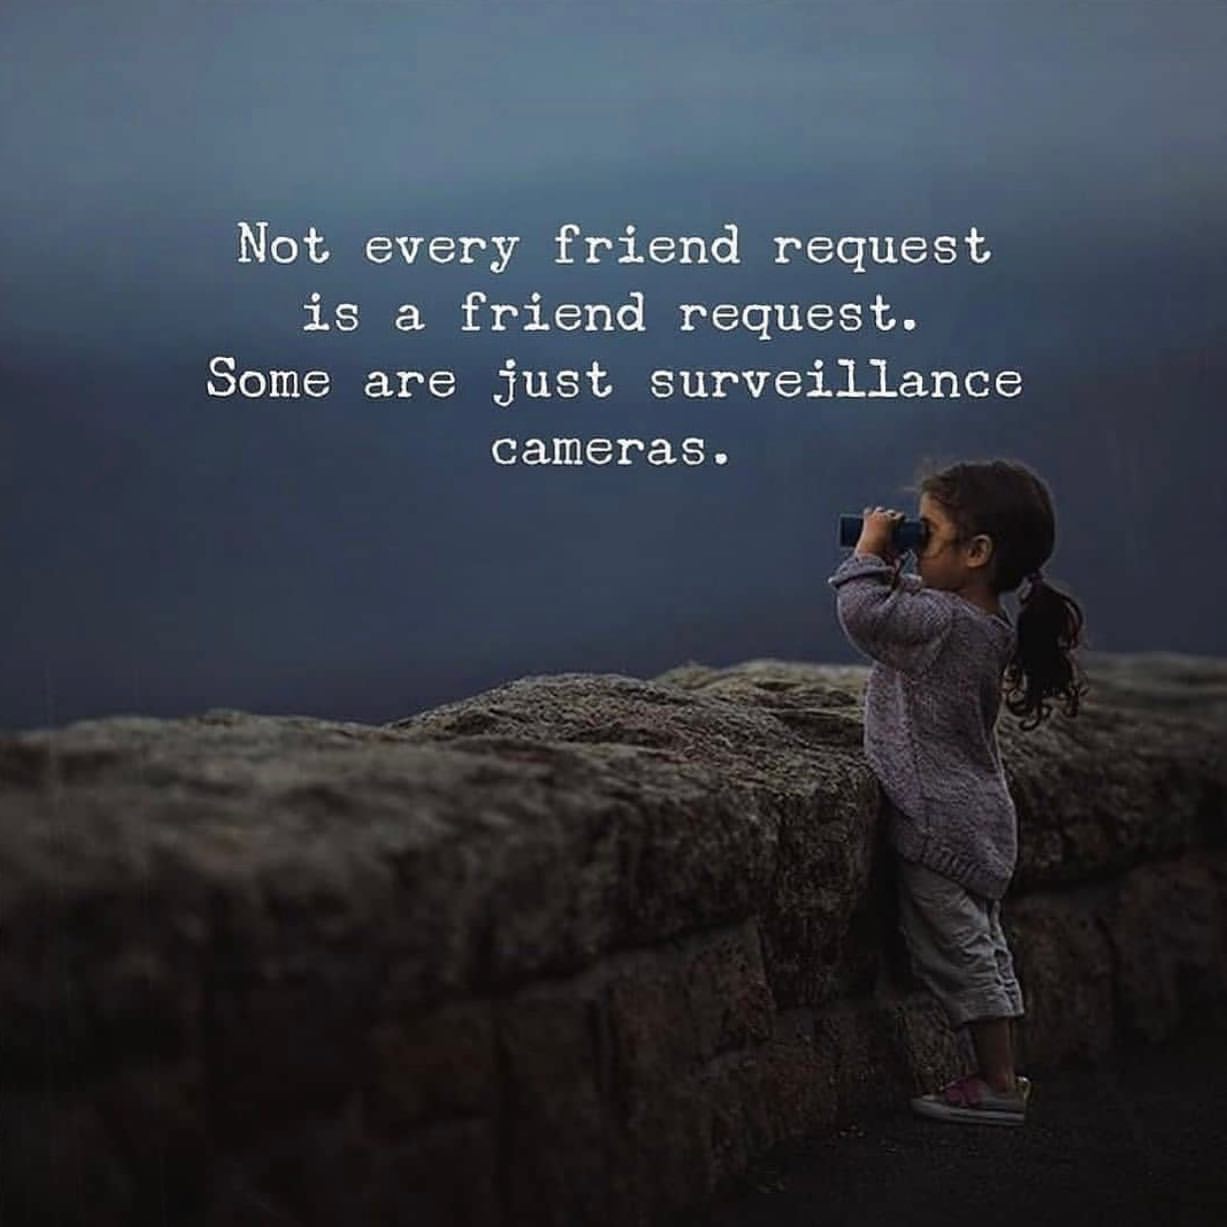 Not every friend request is a friend request. Some are just surveillance cameras.